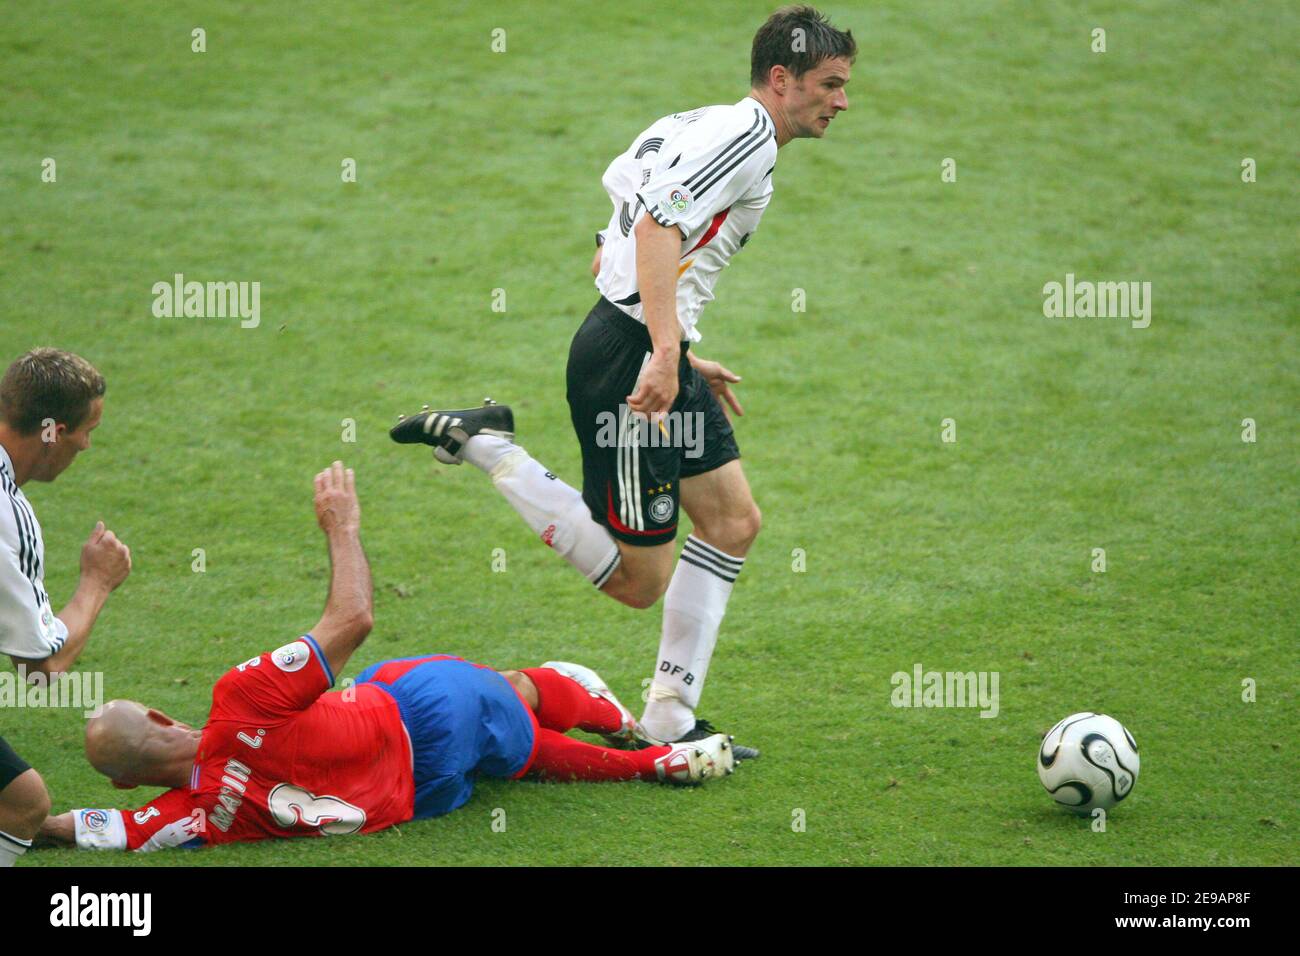 Germany's Arne Friedrich and Costa Rica's Luis Marin in action during the World Cup 2006, Group A, Germany vs Costa Rica in Munich, Germany on June 9, 2006. Germany won 4-2. Photo by Gouhier-Hahn-Orban/Cameleon/ABACAPRESS.COM Stock Photo